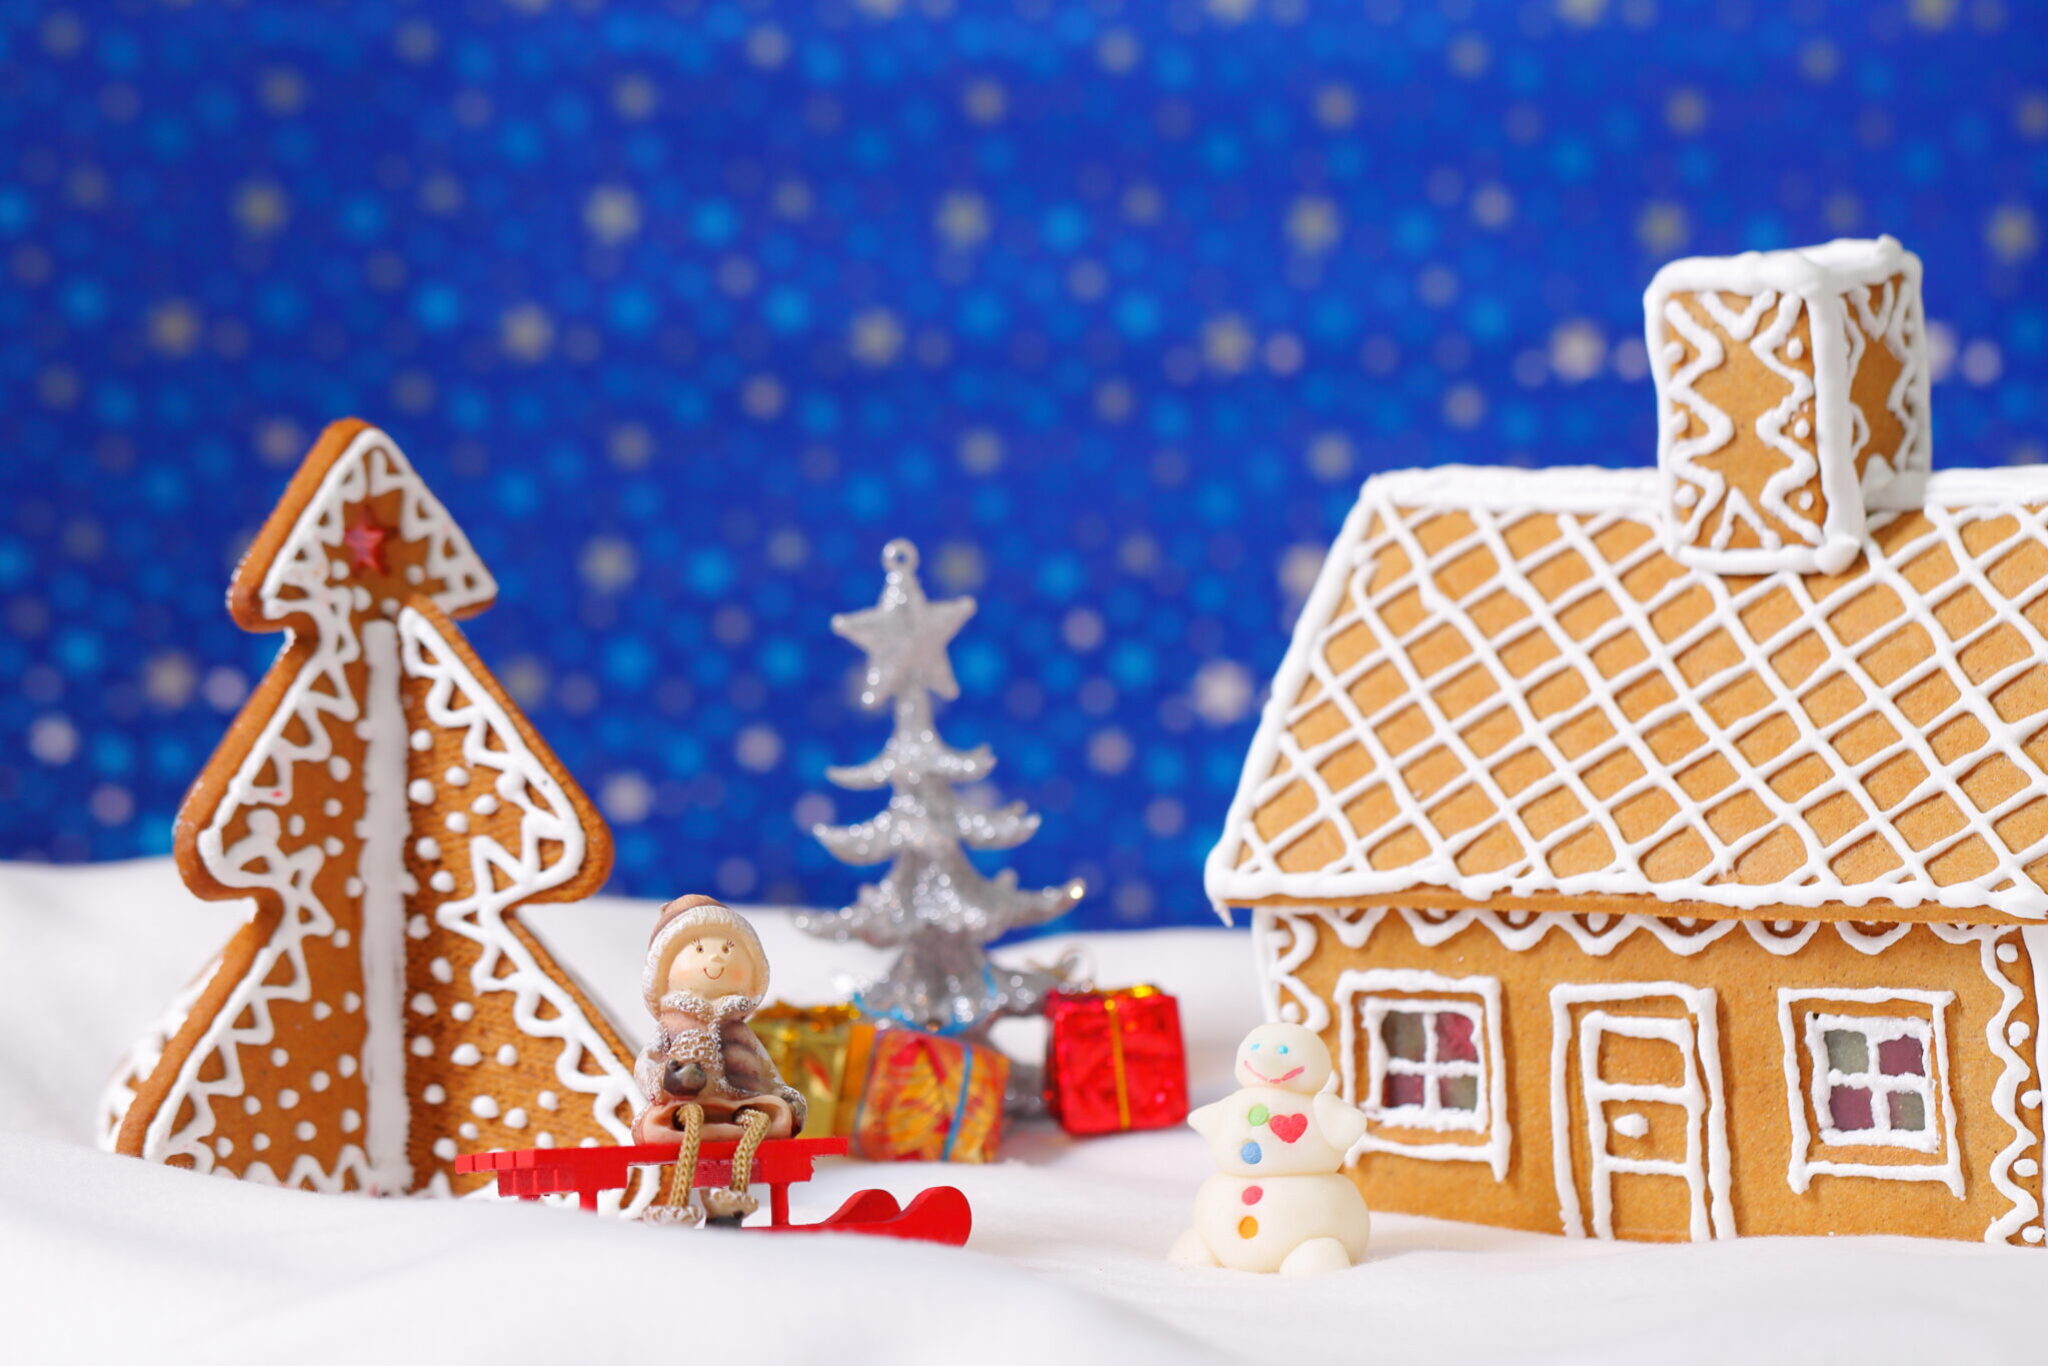 Home Sweet Home: A Gingerbread House-Making Contest